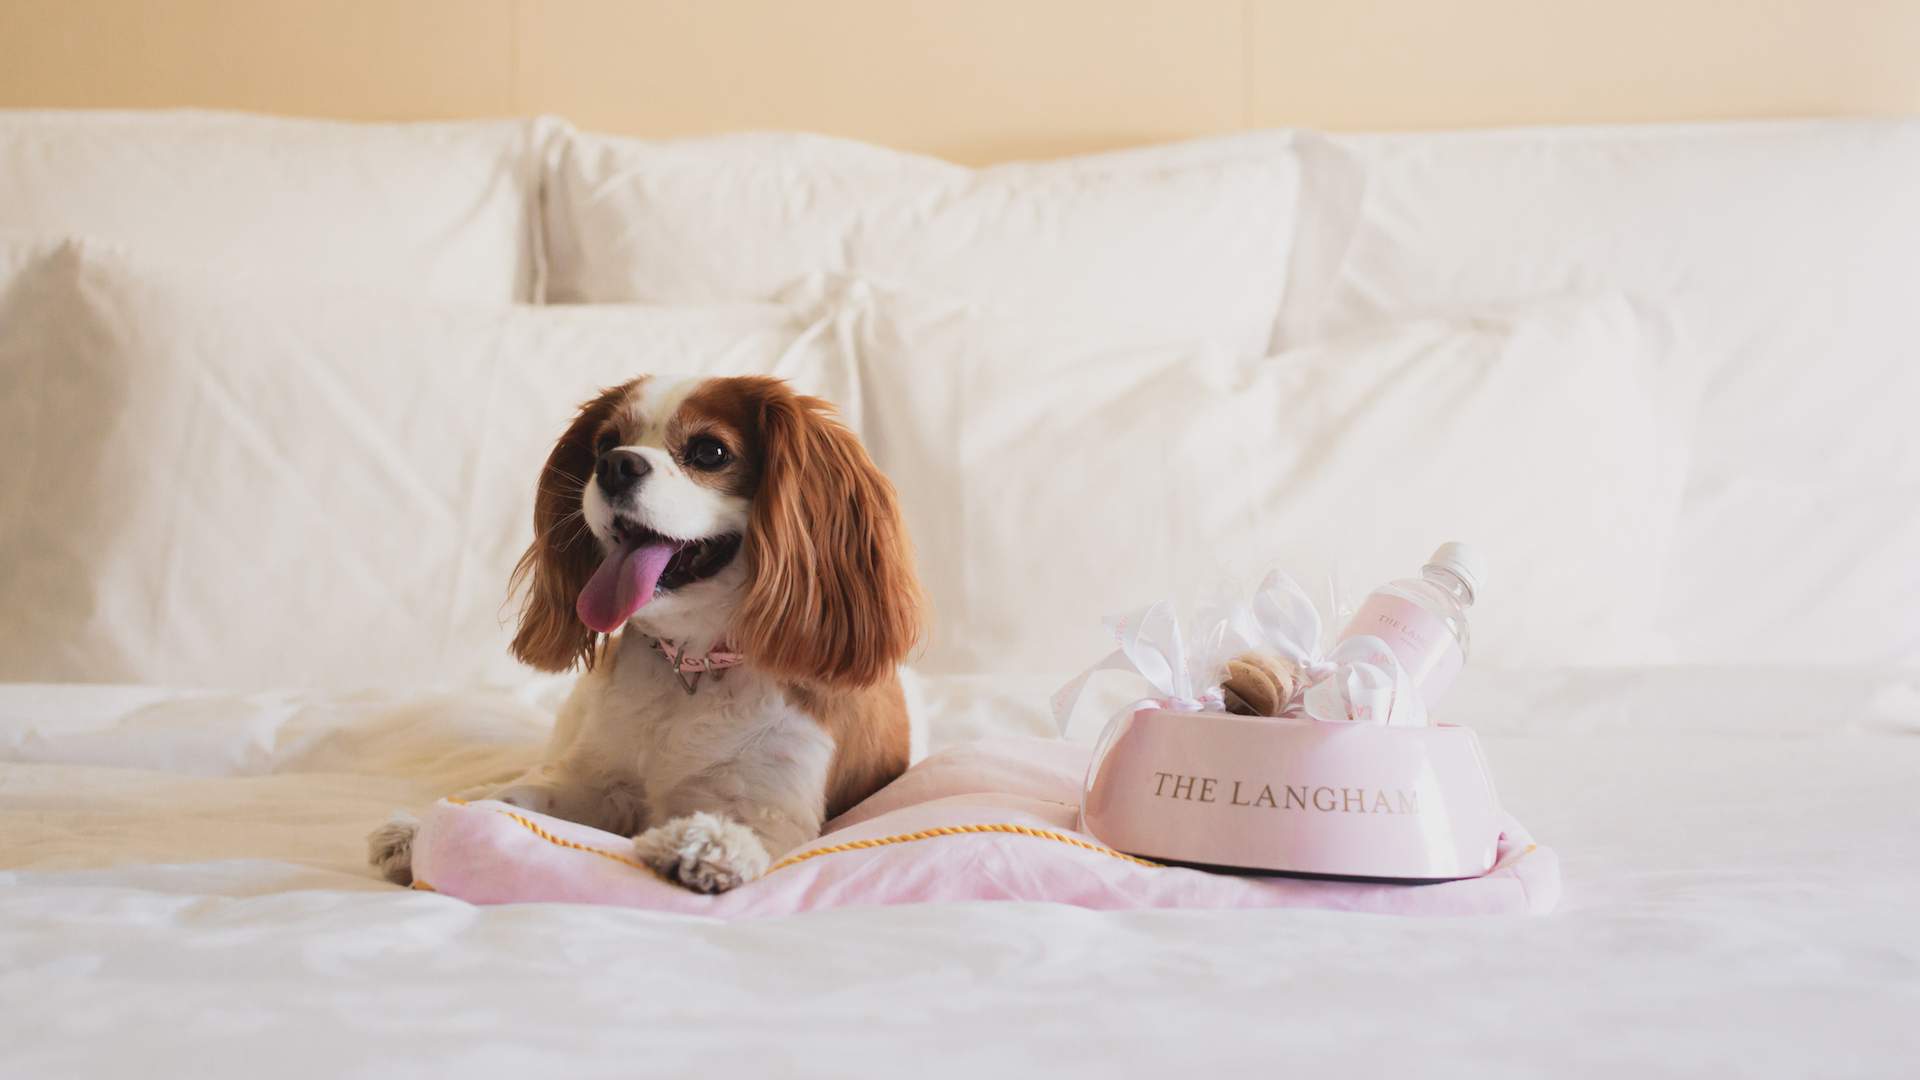 The Langham - one of the best dog-friendly hotels in Sydney